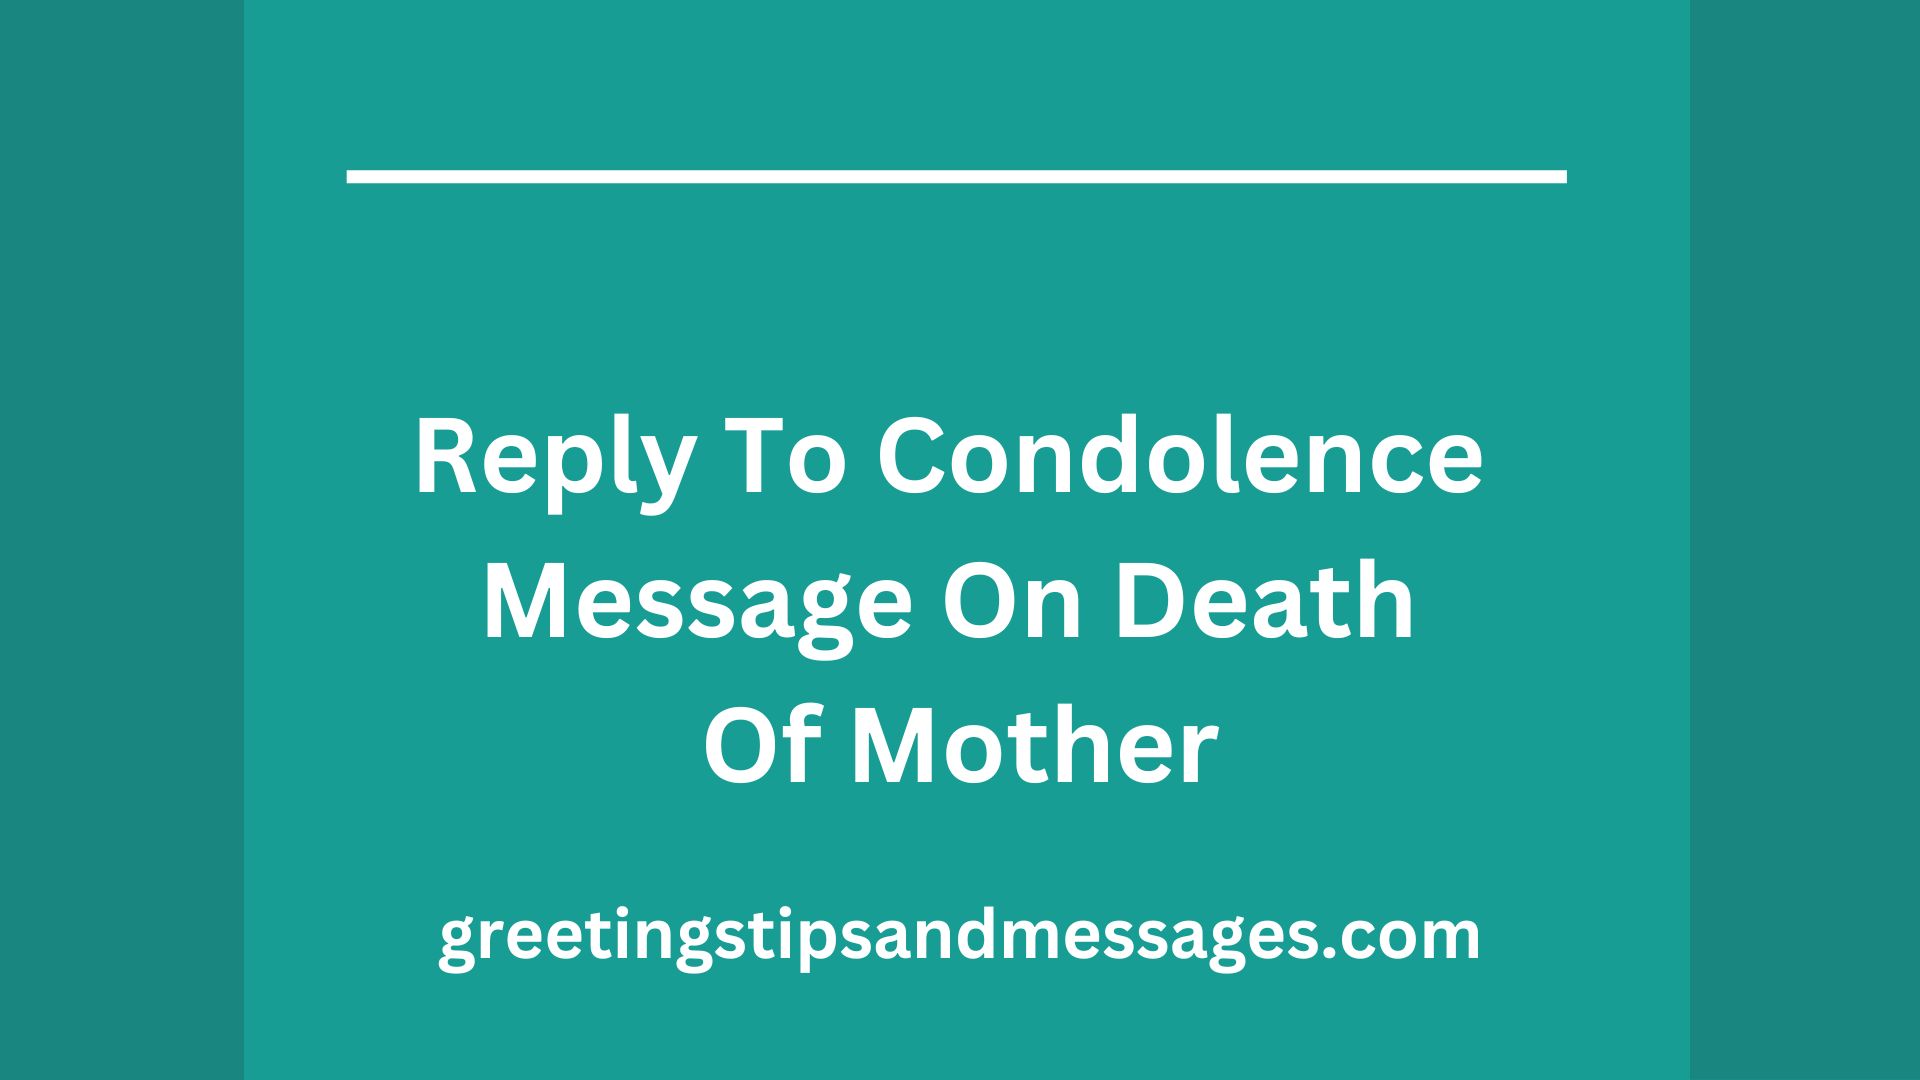 Reply To Condolence Message On Death Of Mother